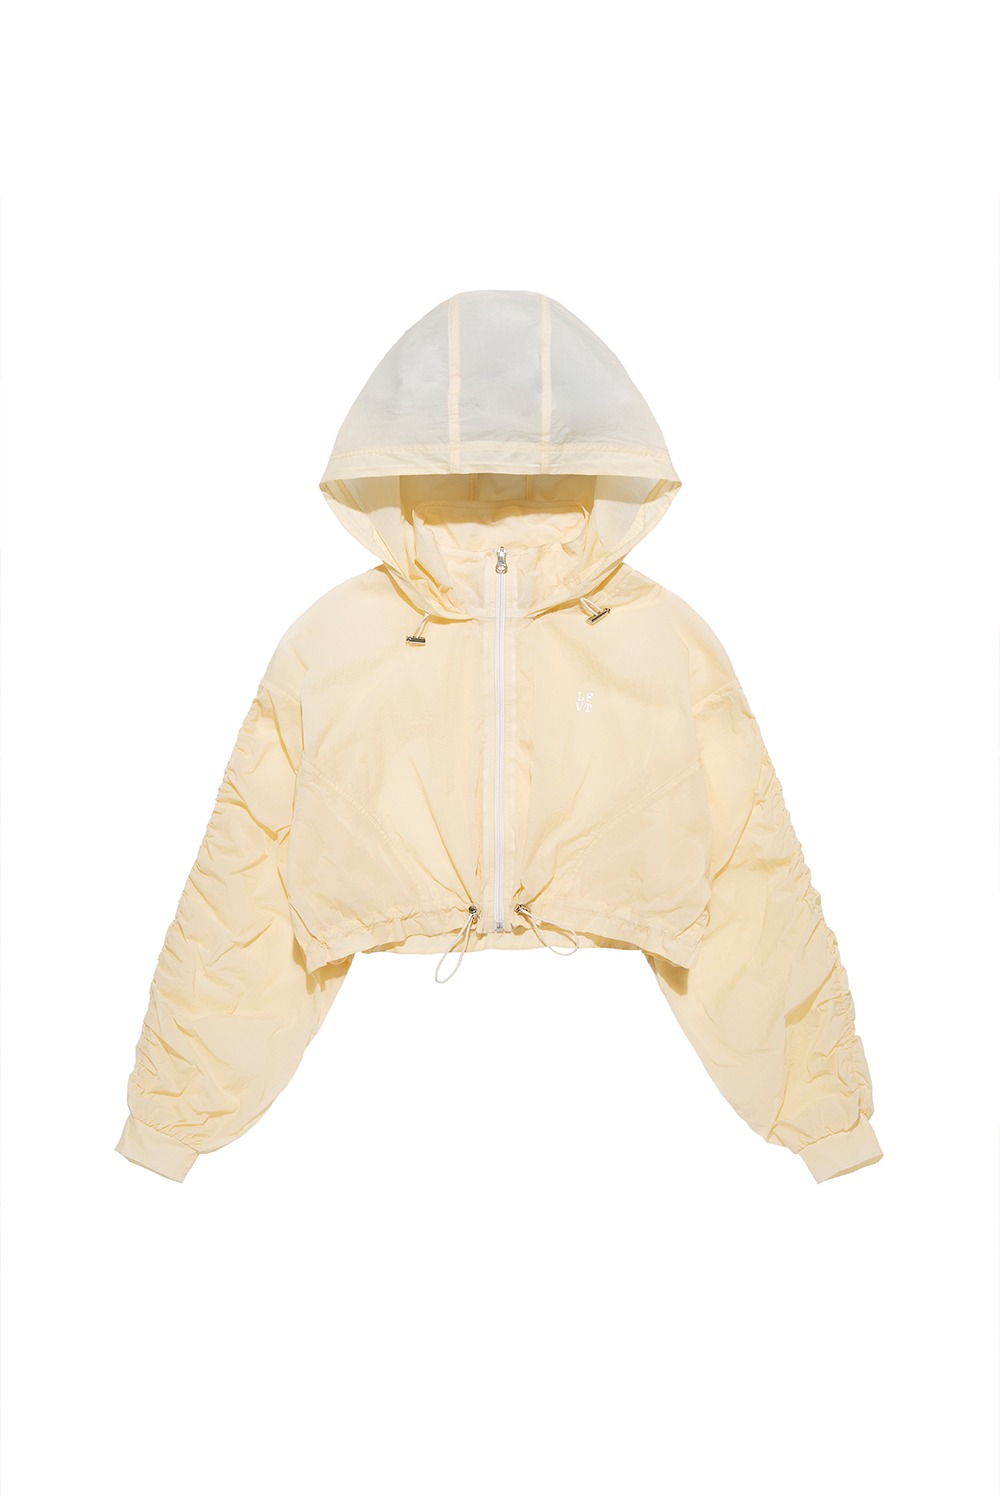 LOVEFORTY SHIRRING ACTIVE WIND BREAKER (YELLOW) RICHEZ